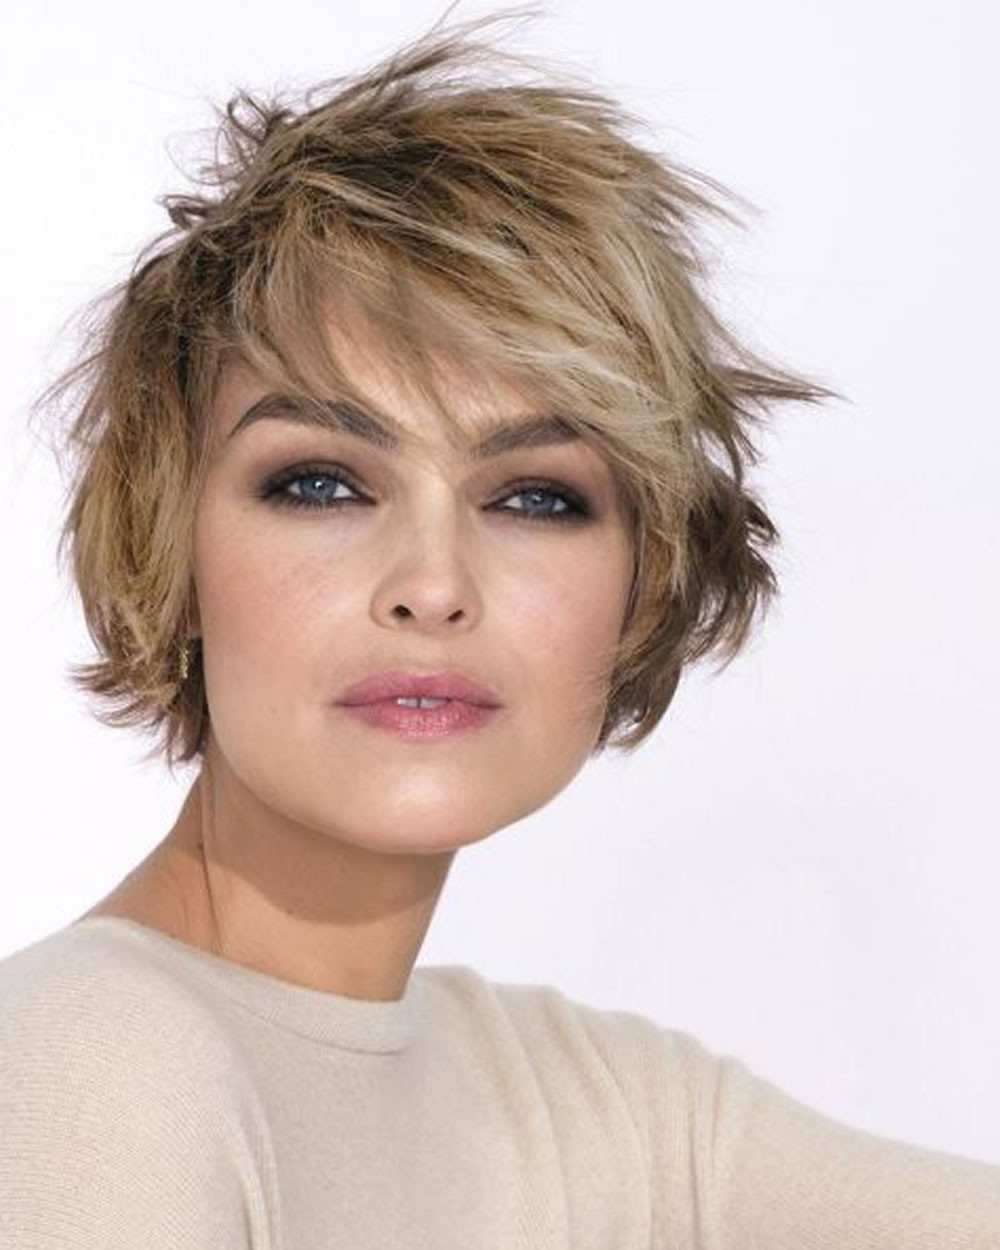 Hairstyles 2019 Female
 Hey La s Best 13 Short haircuts for round faces